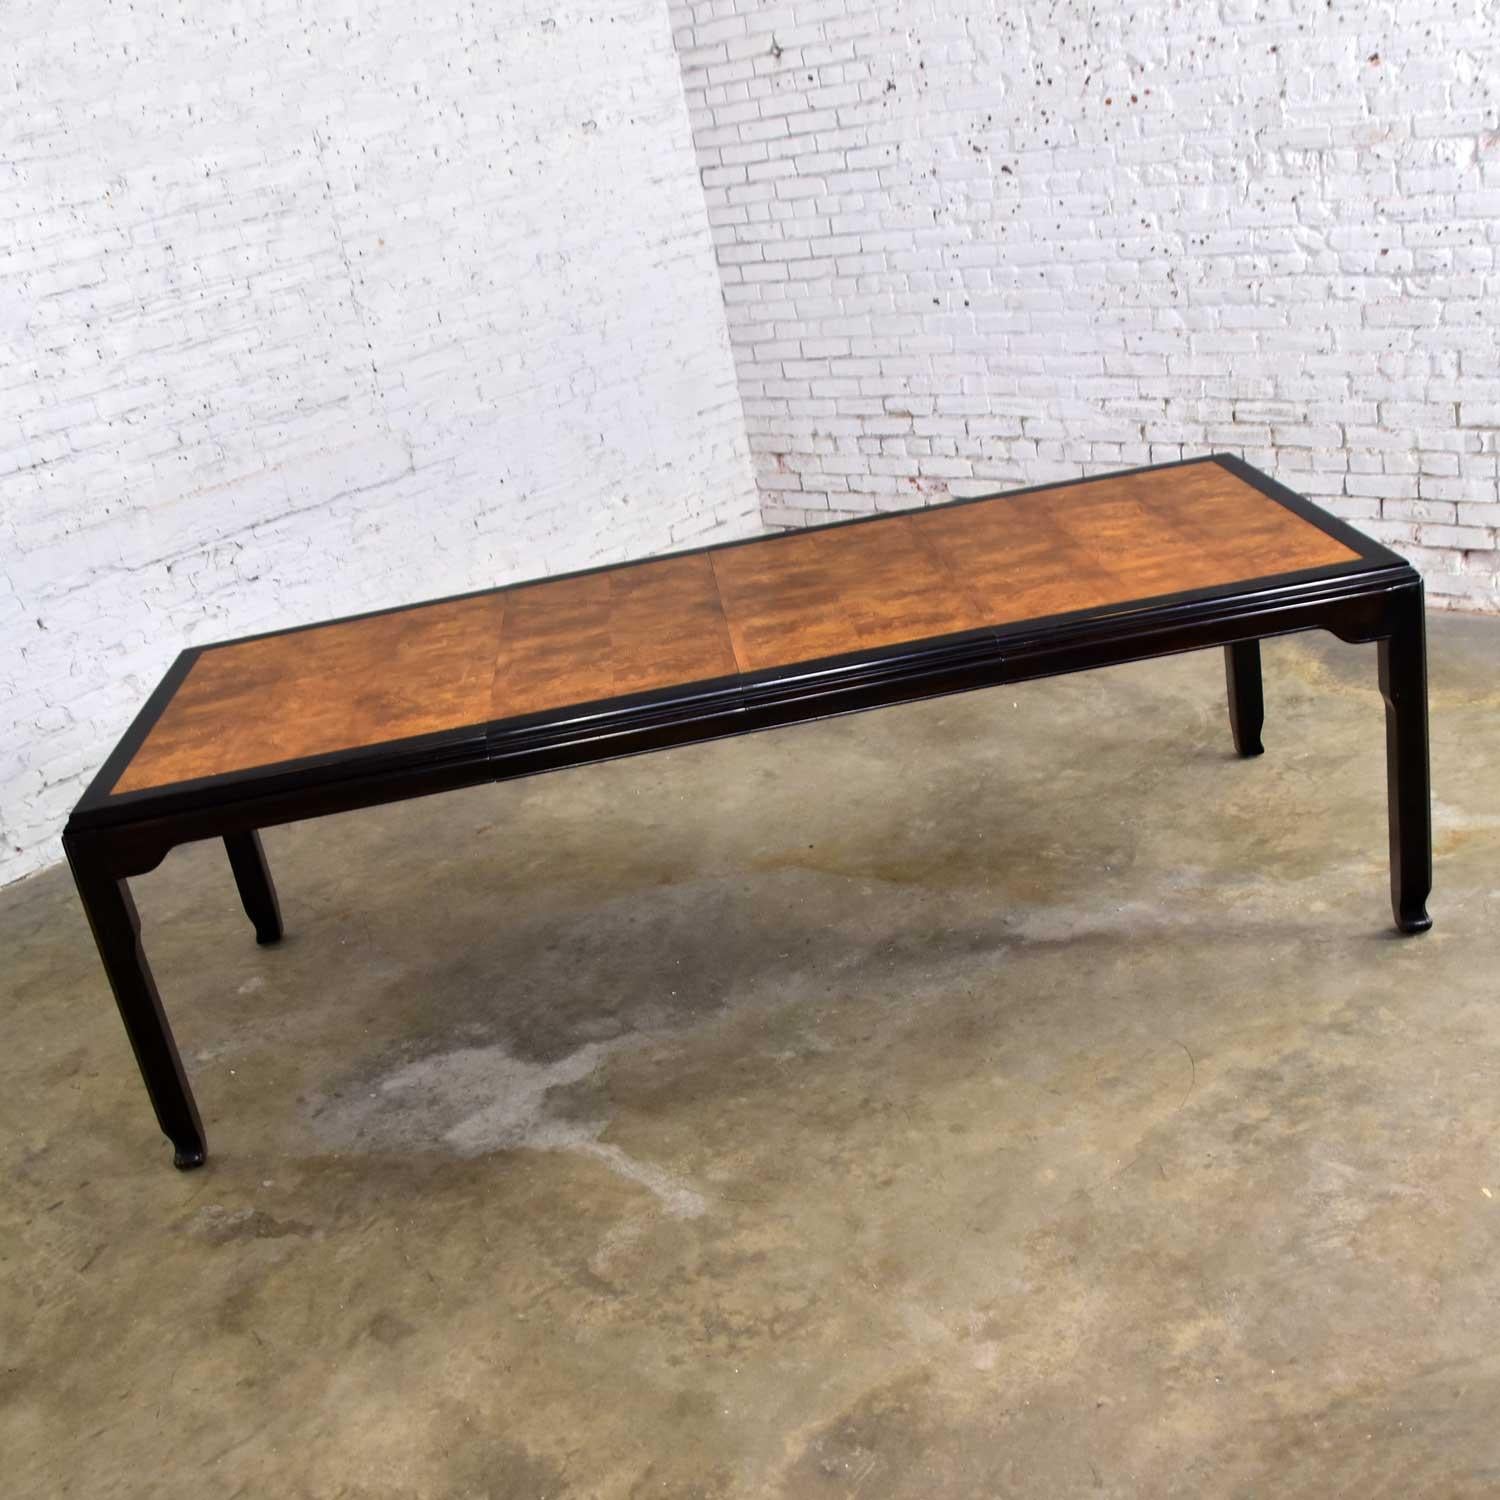 TABLE
Fabulous Hollywood Regency Chinoiserie dining table designed by Raymond K. Sobota for his Chin Hua Collection for Century Furniture. Comprised of an ebonized dark brown frame with burl wood inset. Beautiful vintage condition. The framework of